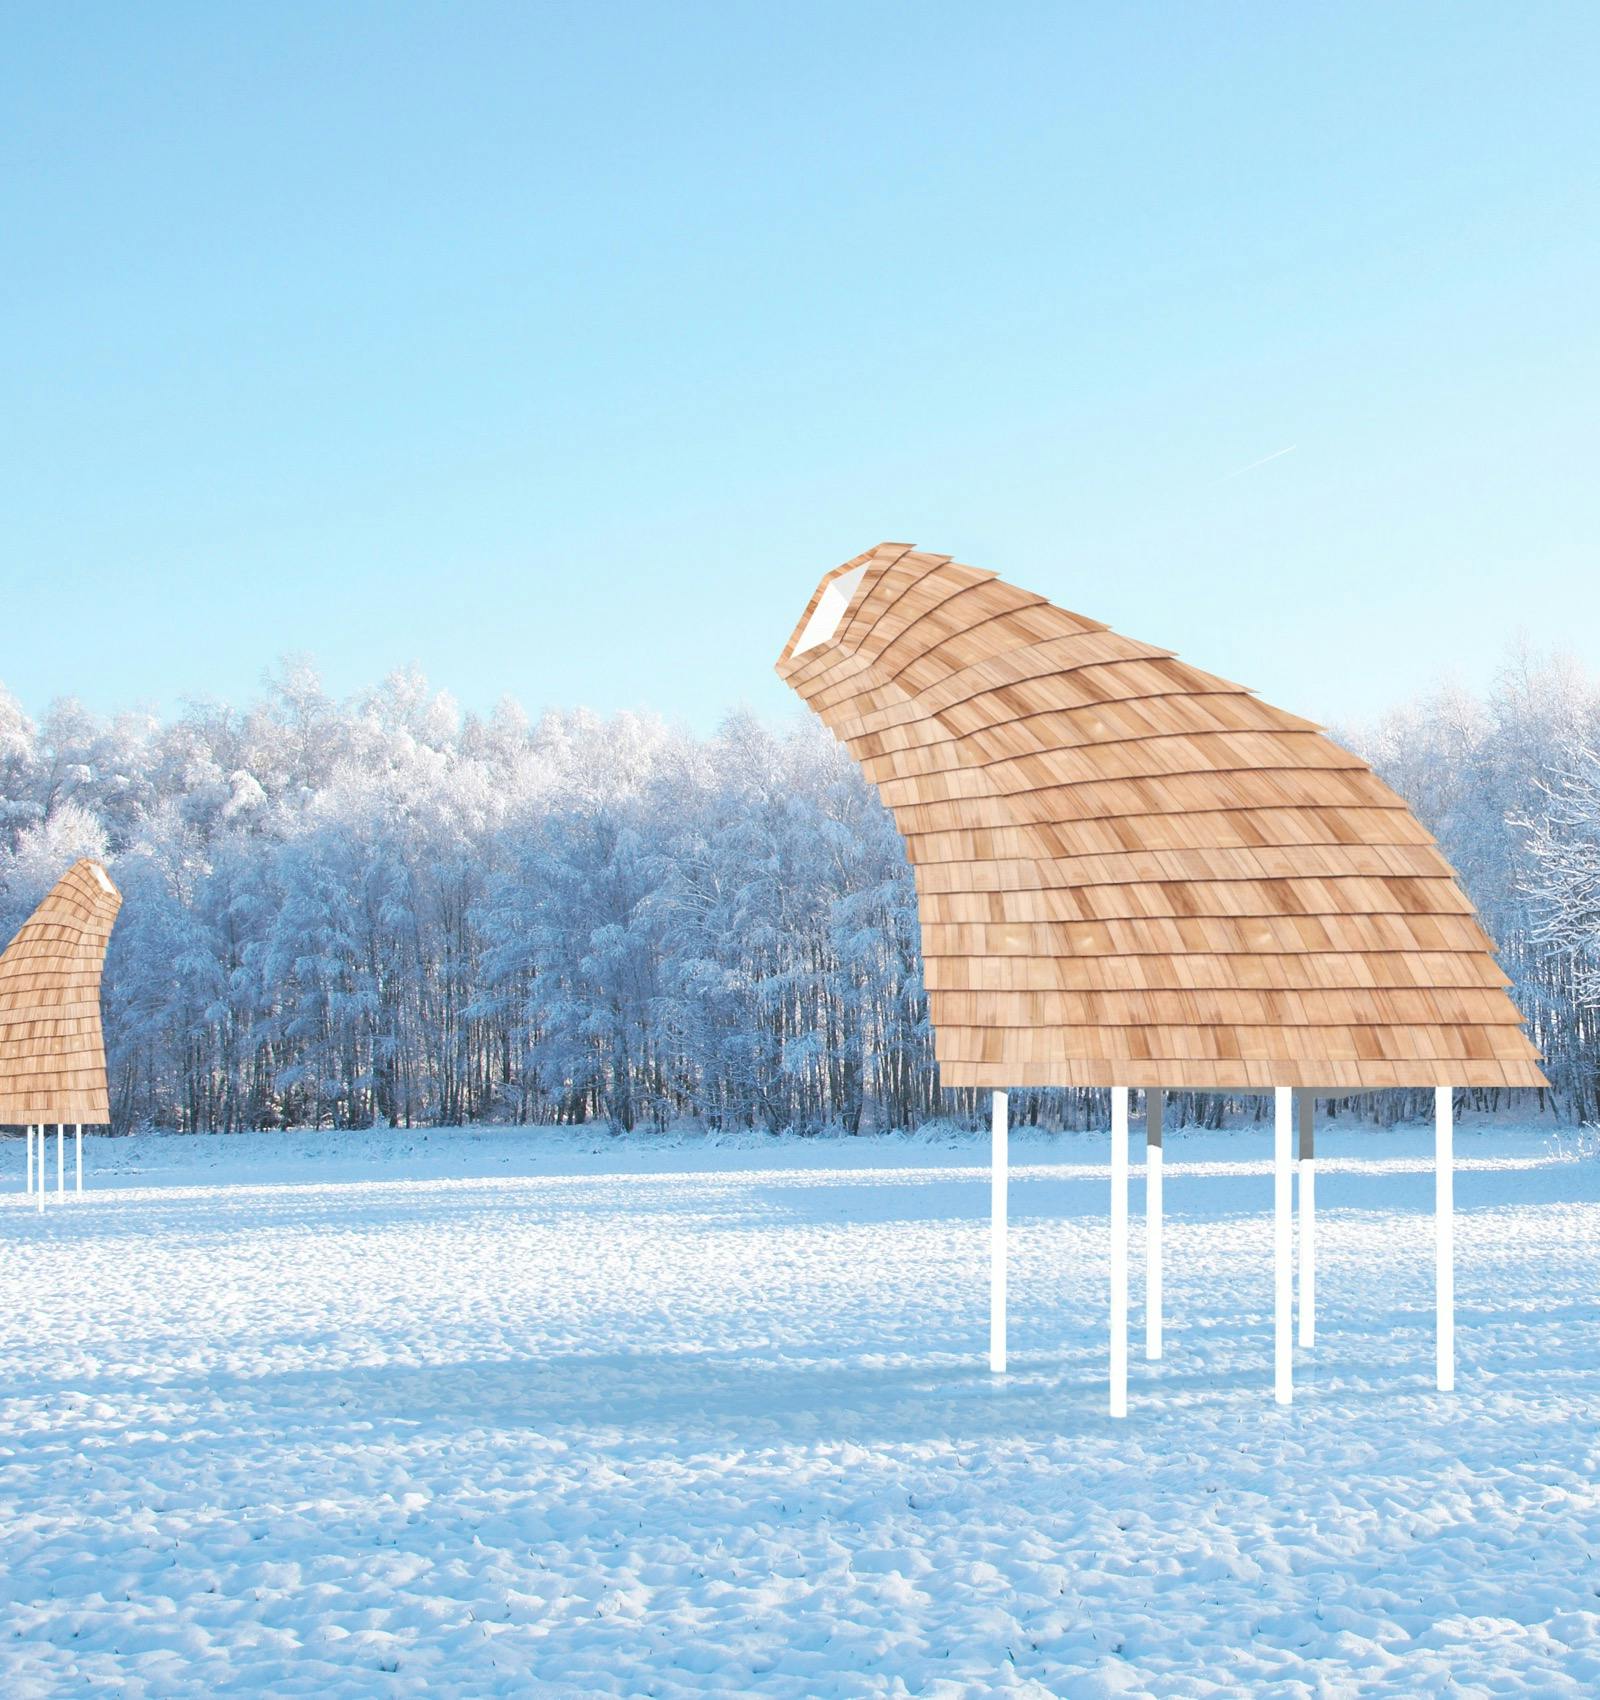 Winning Designs Of The 2020 Warming Huts Competition In Winnipeg